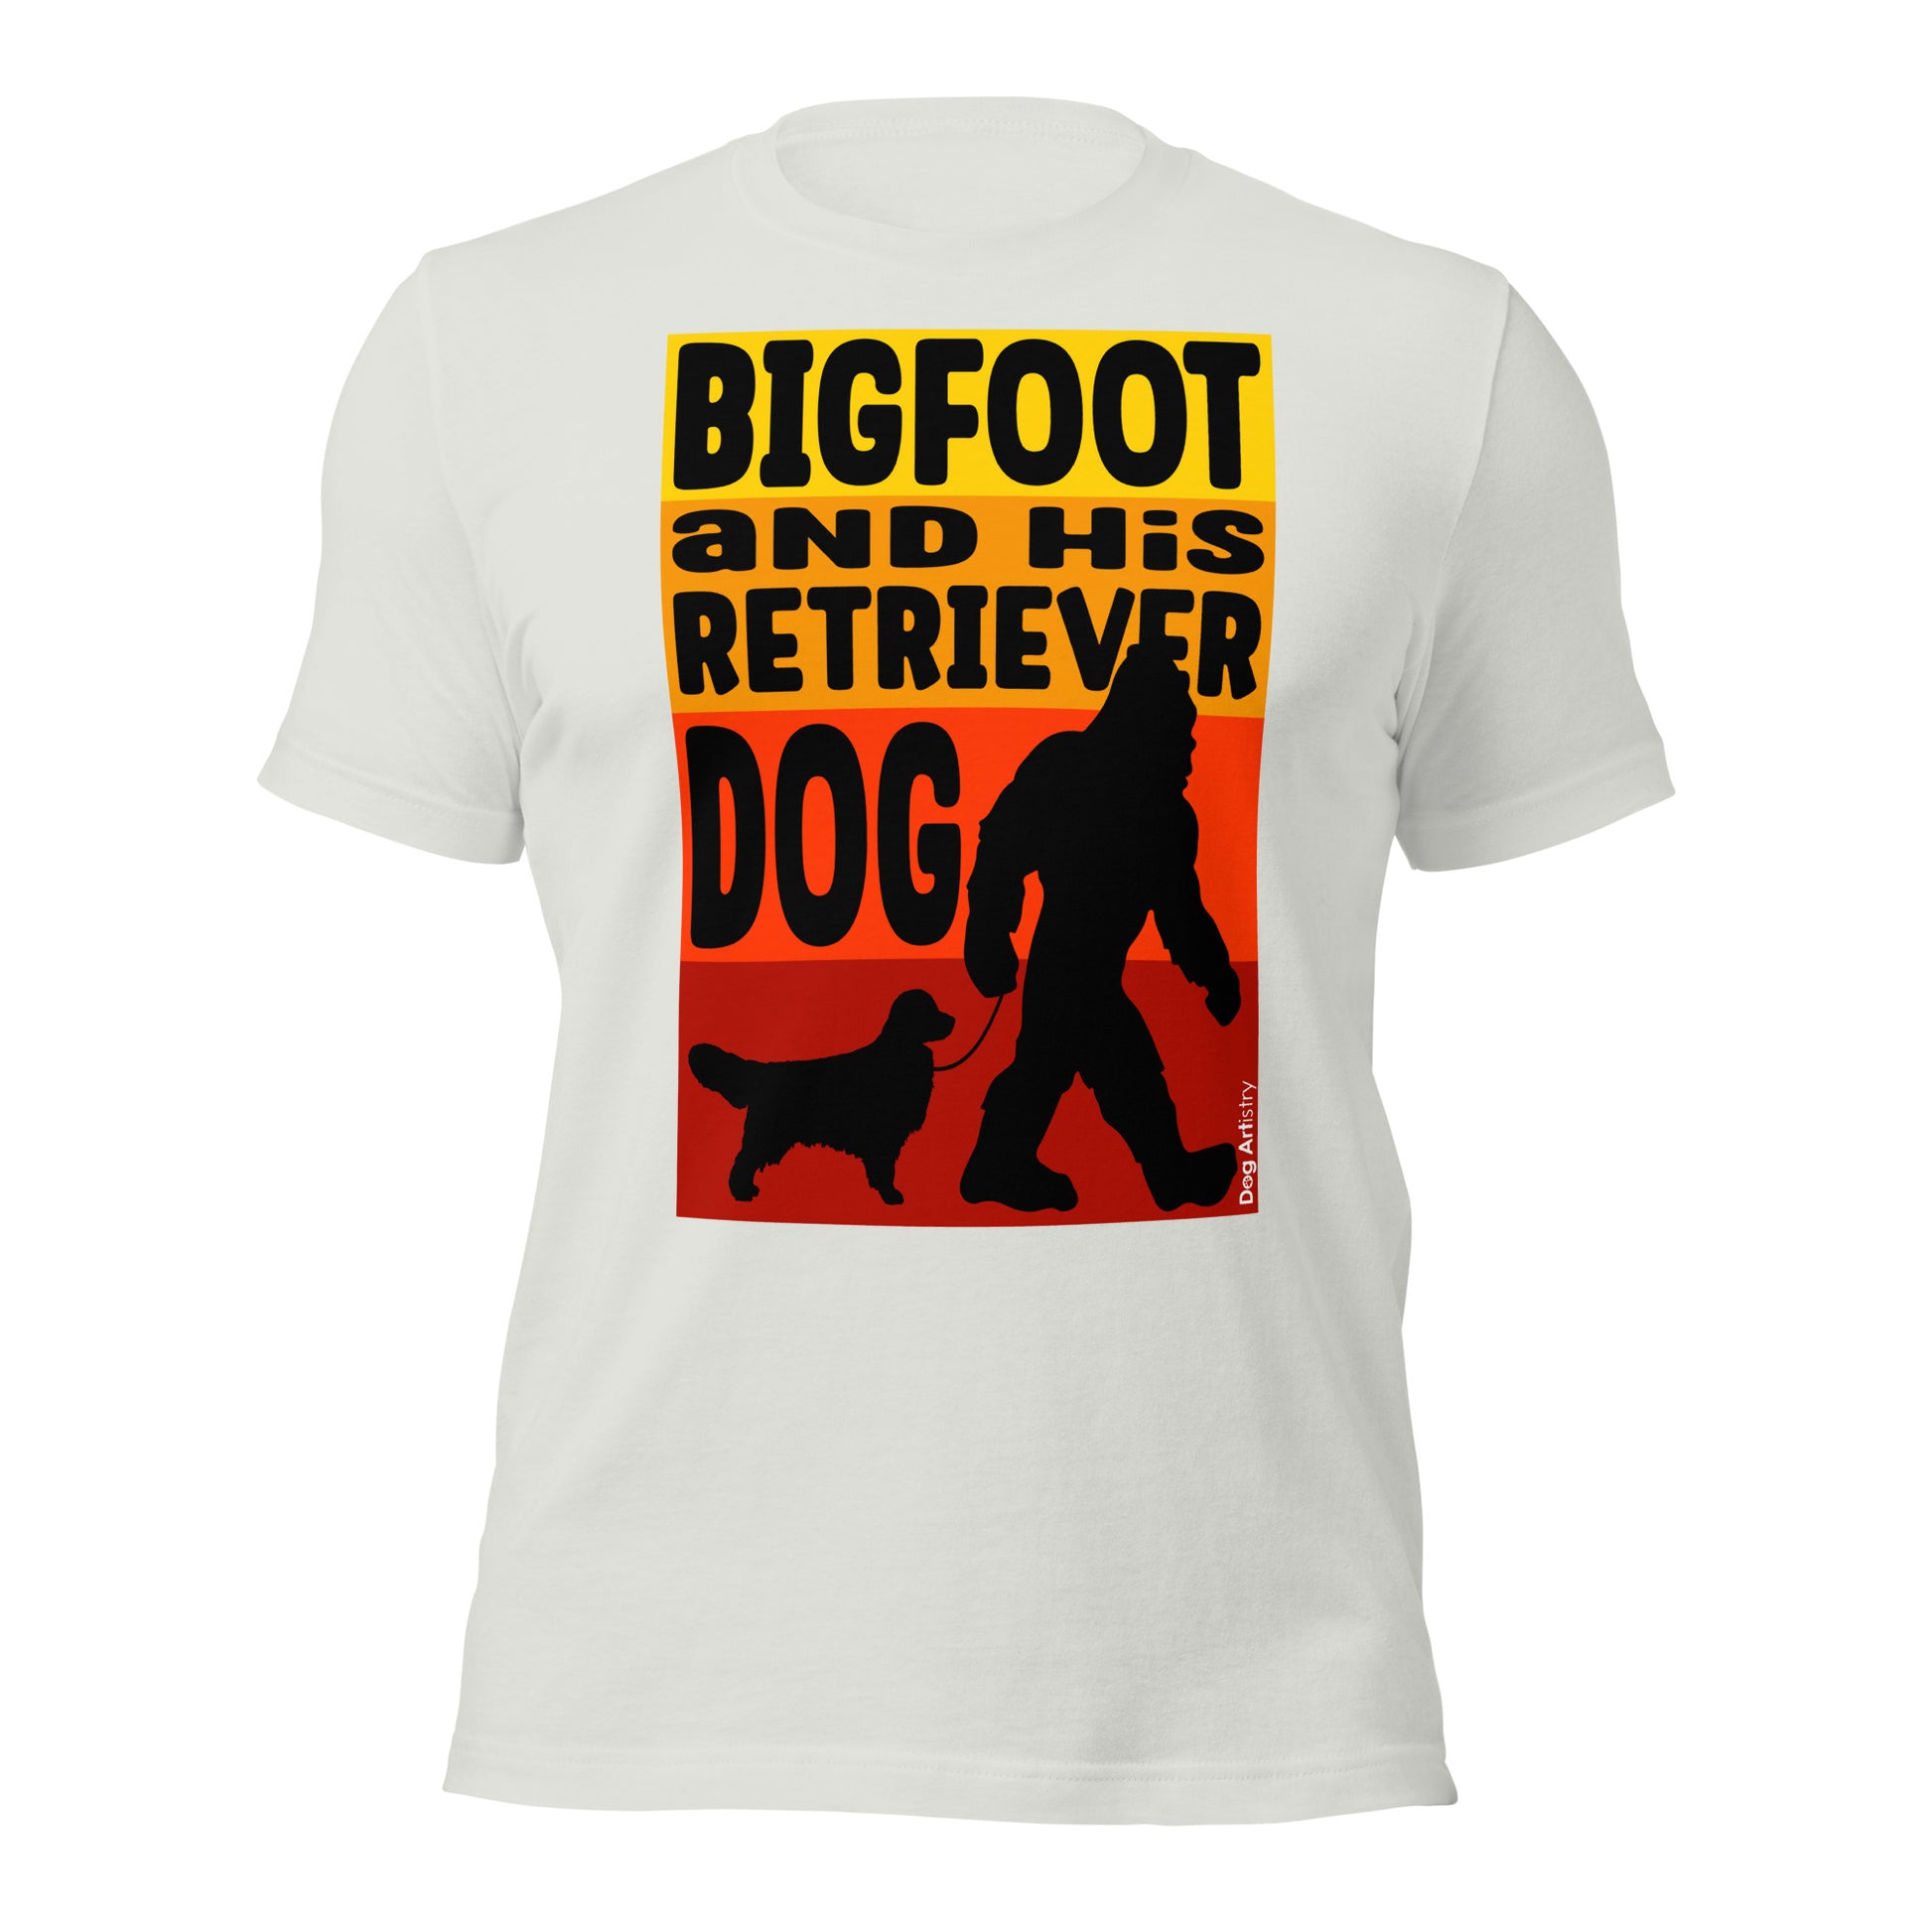 Bigfoot and his Golden Retriever unisex silver t-shirt by Dog Artistry.